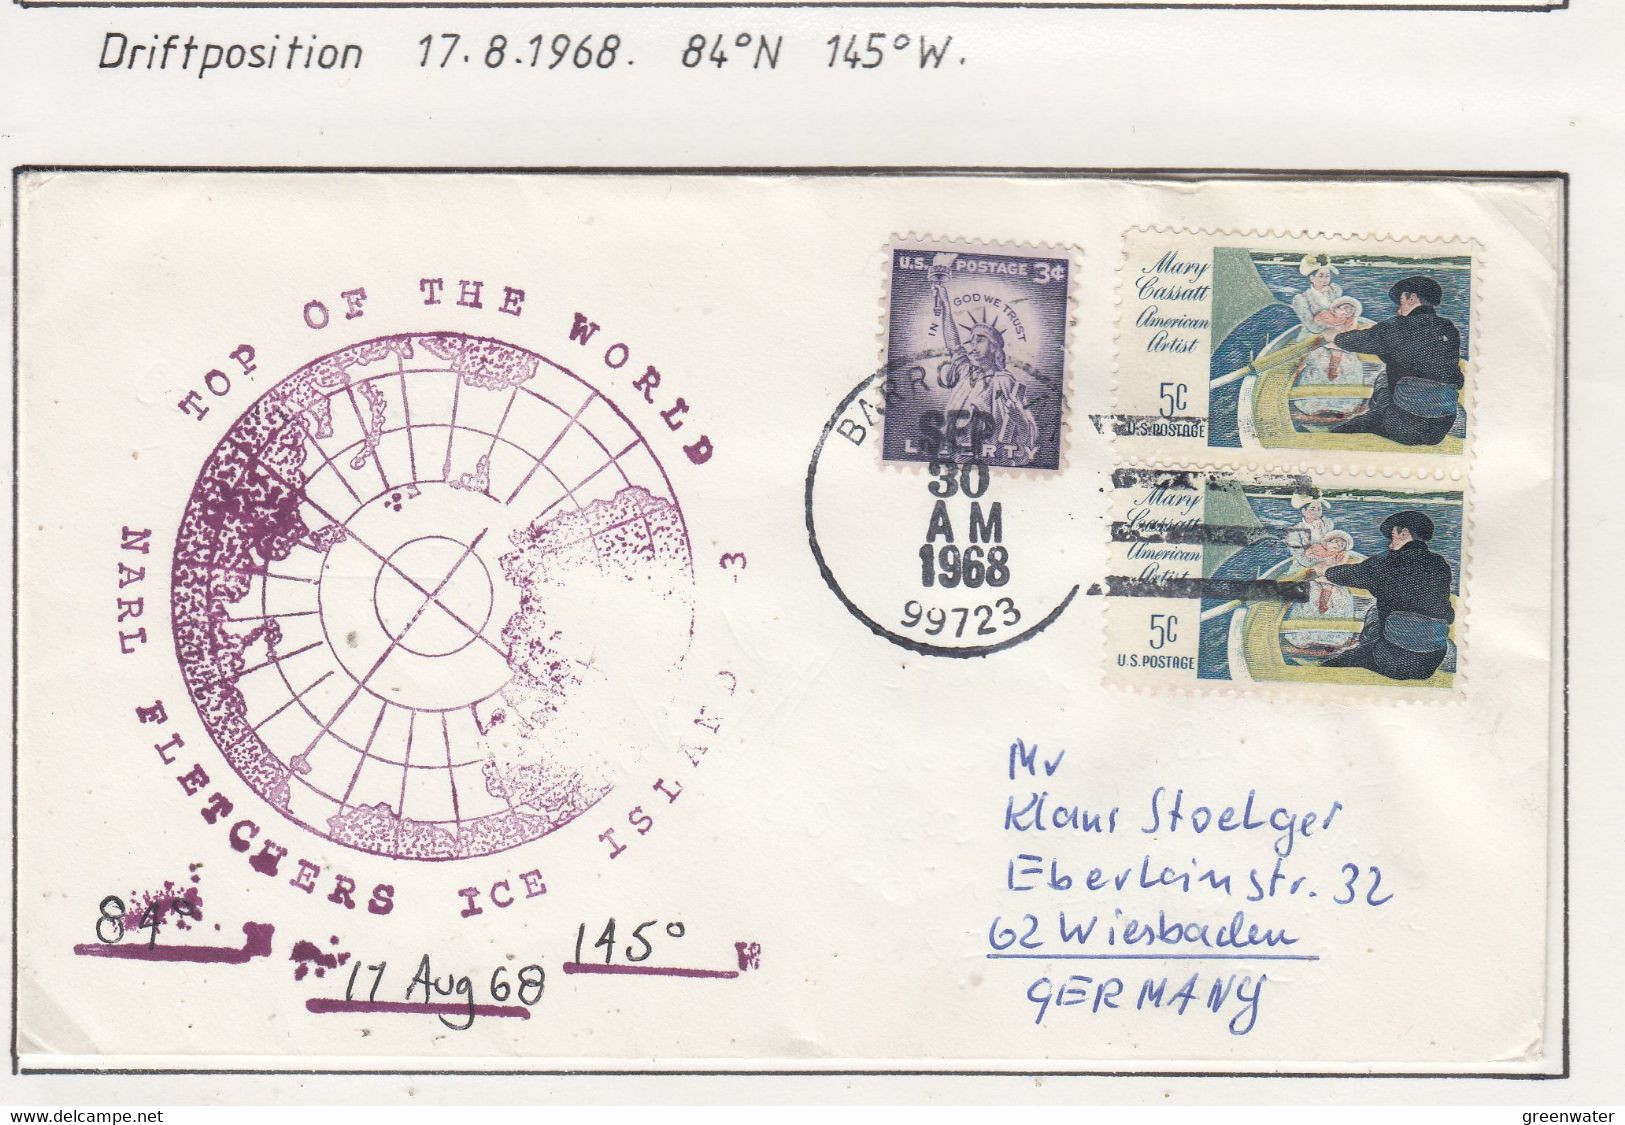 USA Driftstation ICE-ISLAND T-3 Cover Ca Fletcher's Ice Island T-3 Periode 4 Ca  SEP 30 1968 (DR127C) - Scientific Stations & Arctic Drifting Stations